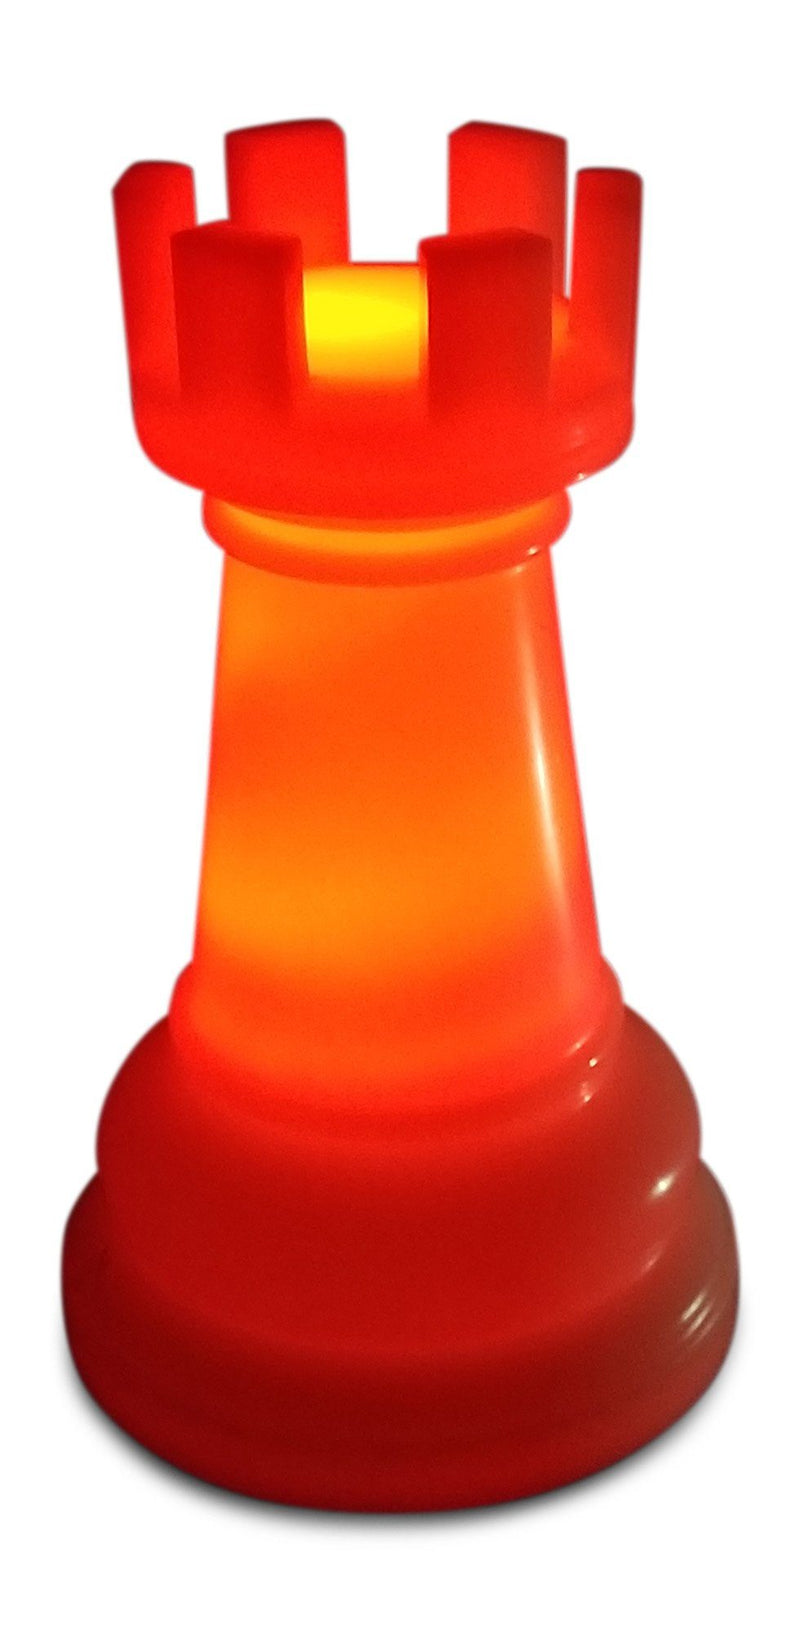 MegaChess 14 Inch Perfect Rook Light-Up Giant Chess Piece - Red |  | MegaChess.com